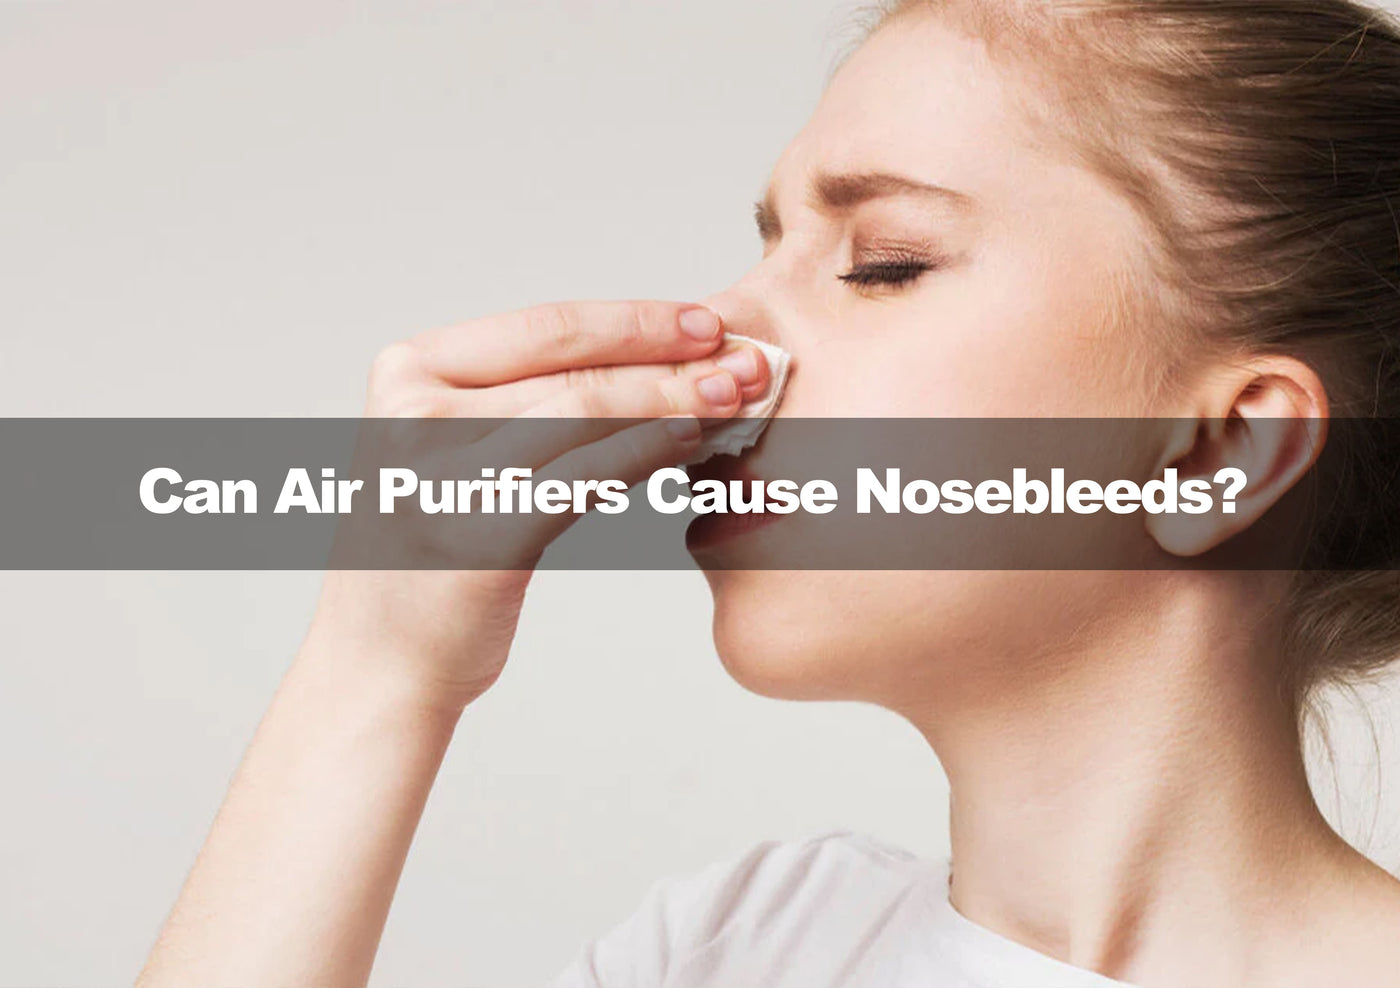 Can Air Purifiers Cause Nosebleeds? Debunking the Myth